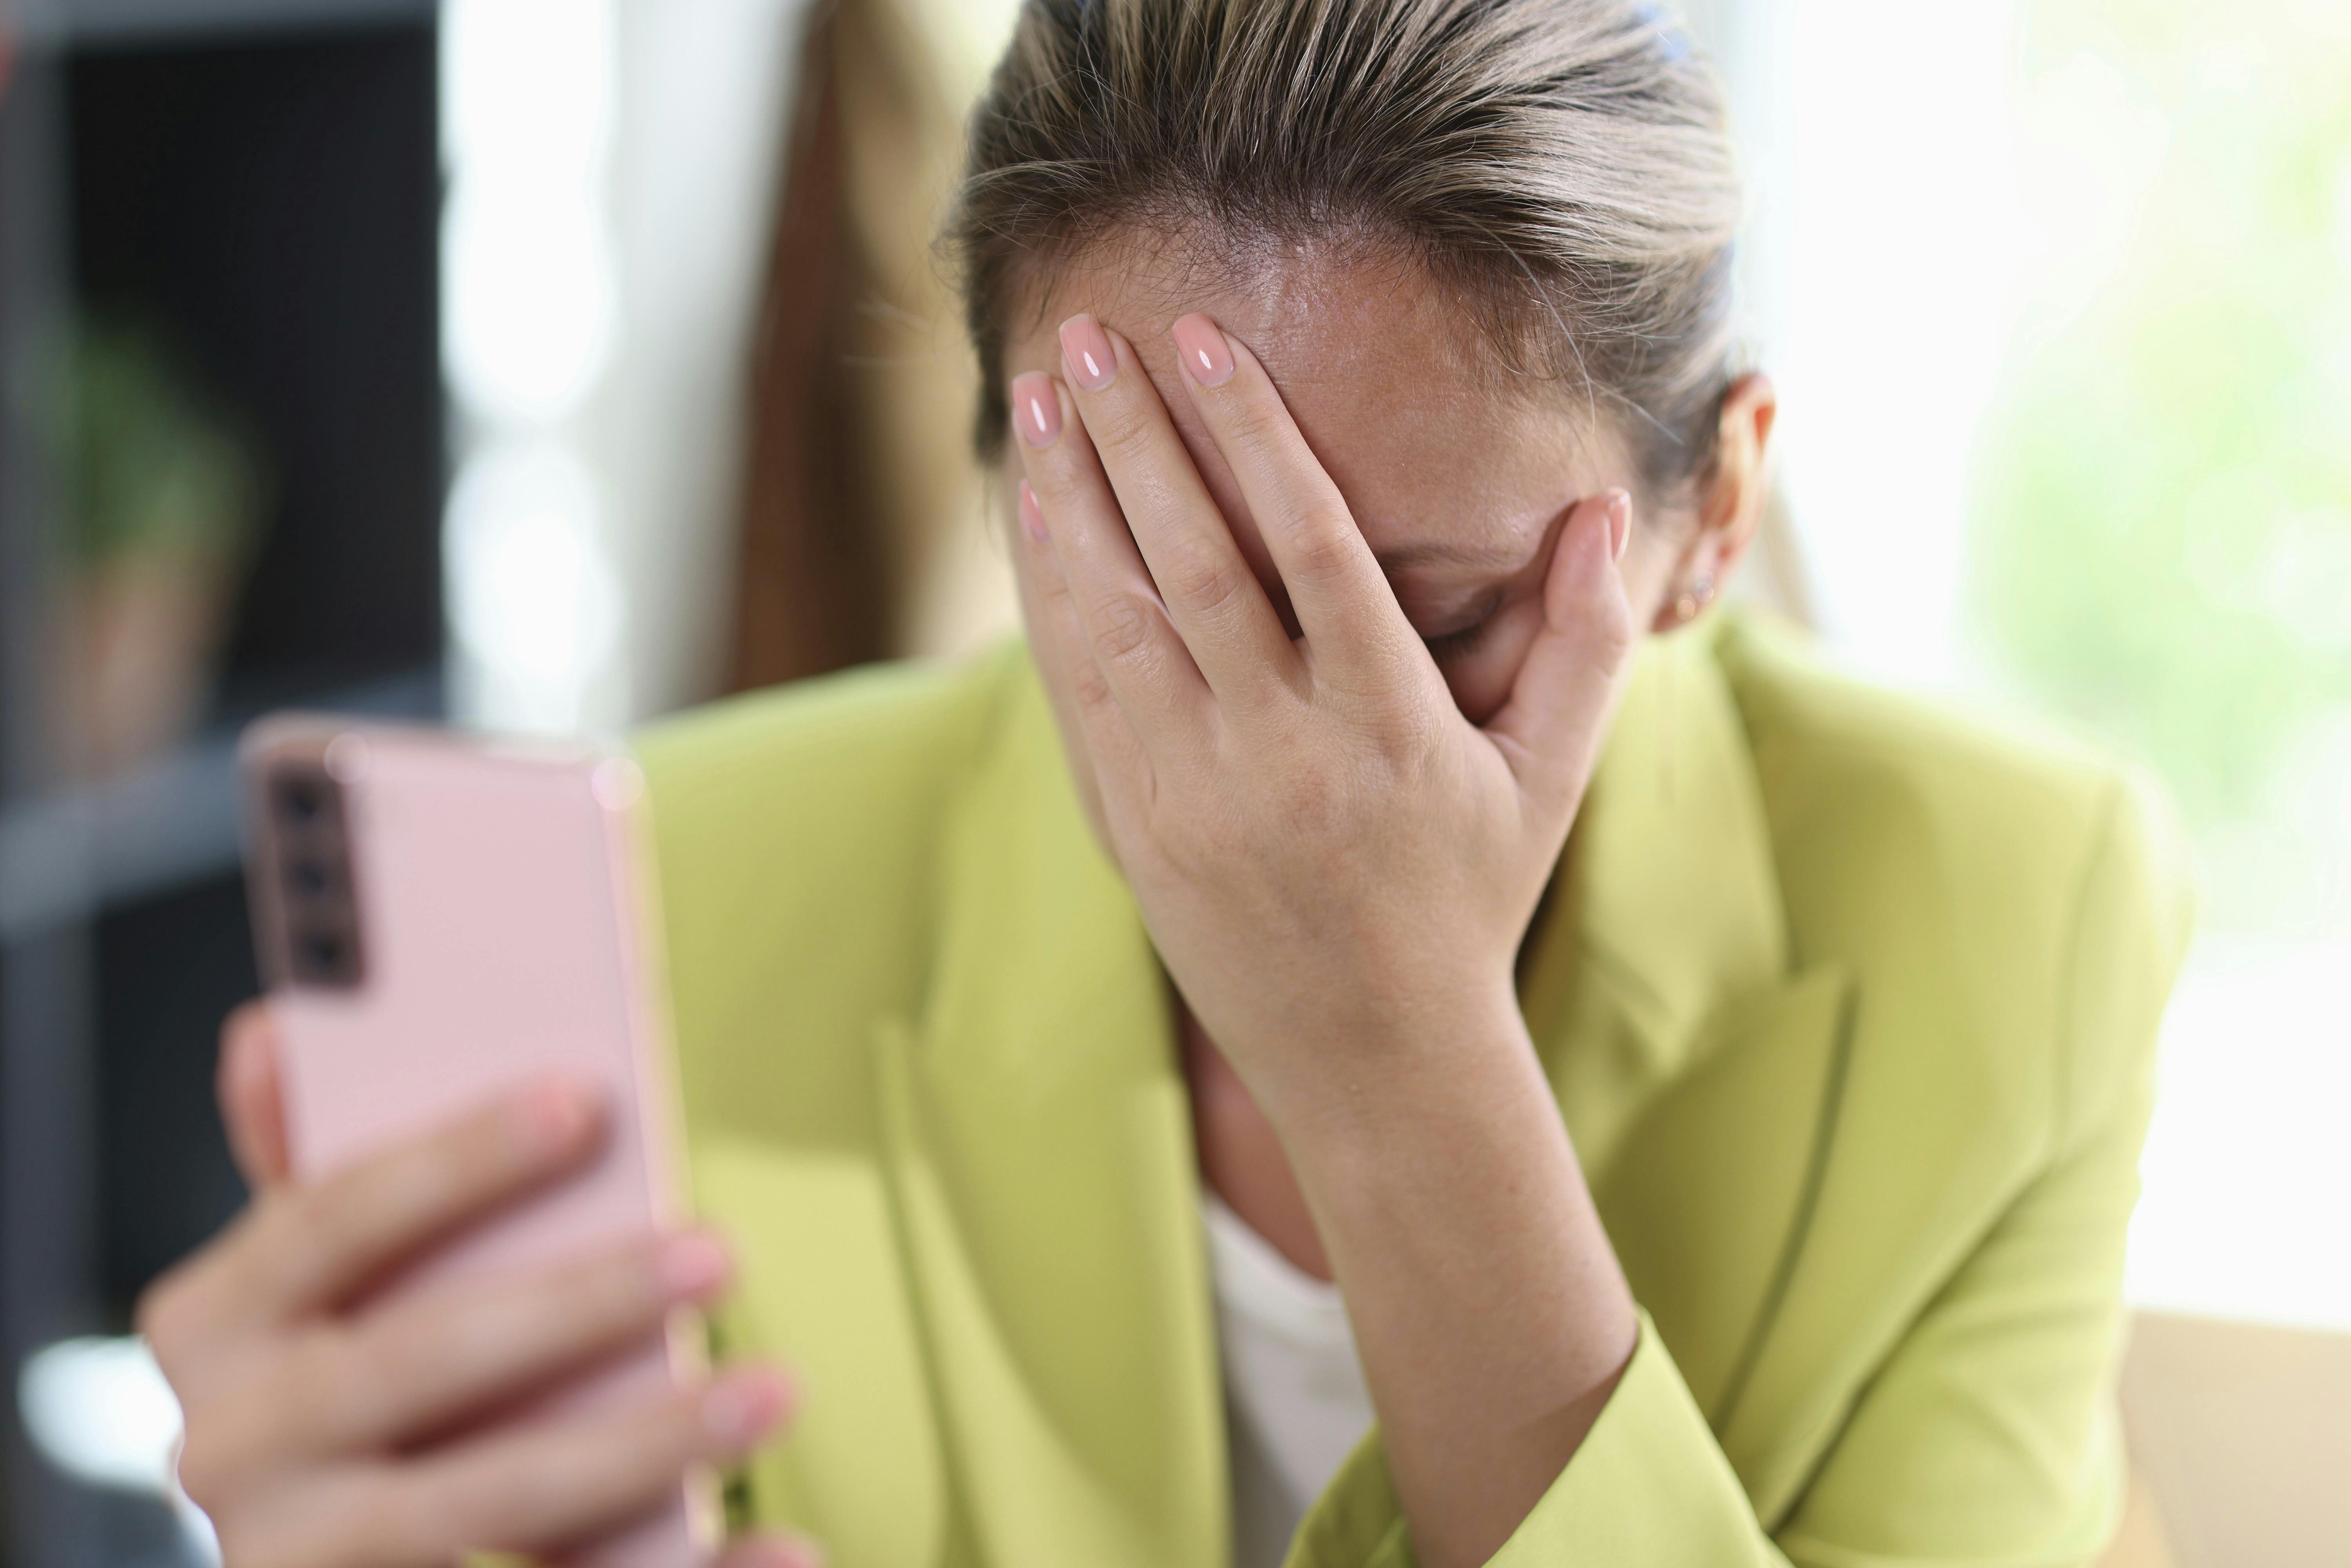 Close-up of frustrated depressed woman covering face with hand. Female holding smartphone and covering face with hand. Bad news or forgetfulness concept